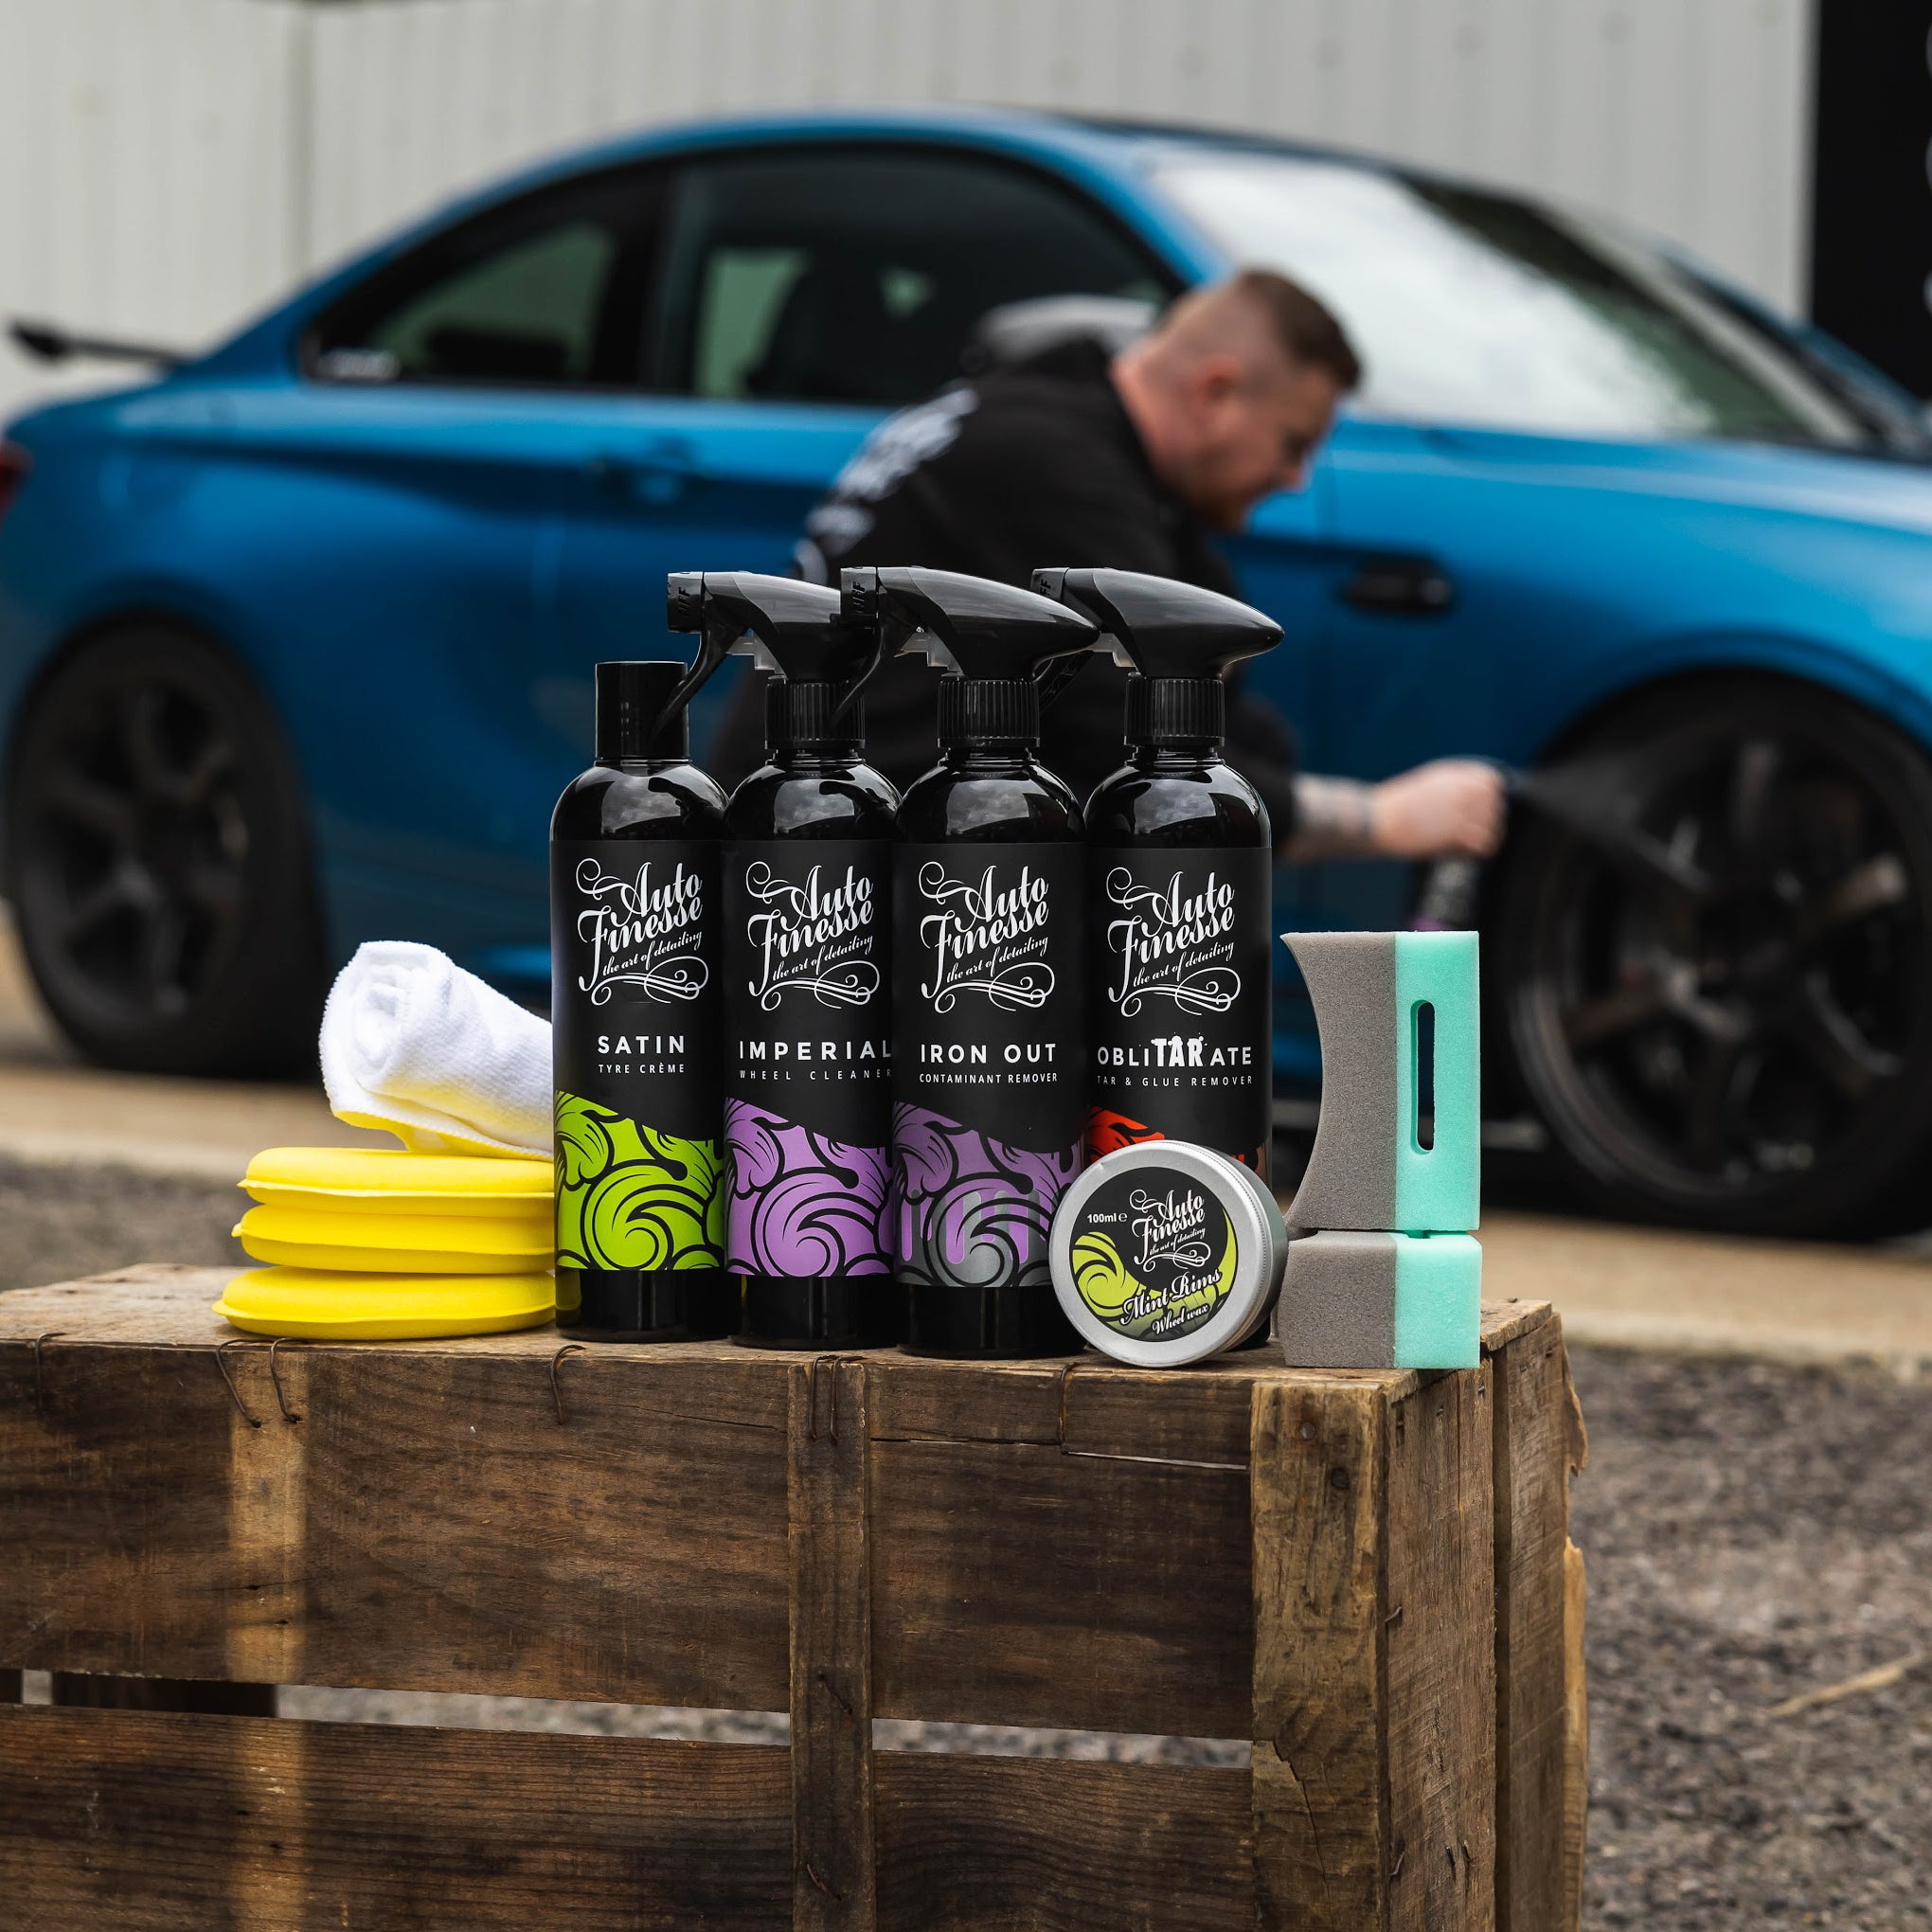 Auto Finesse | Car Detailing Products | Deep Cleaning Wheel Kit